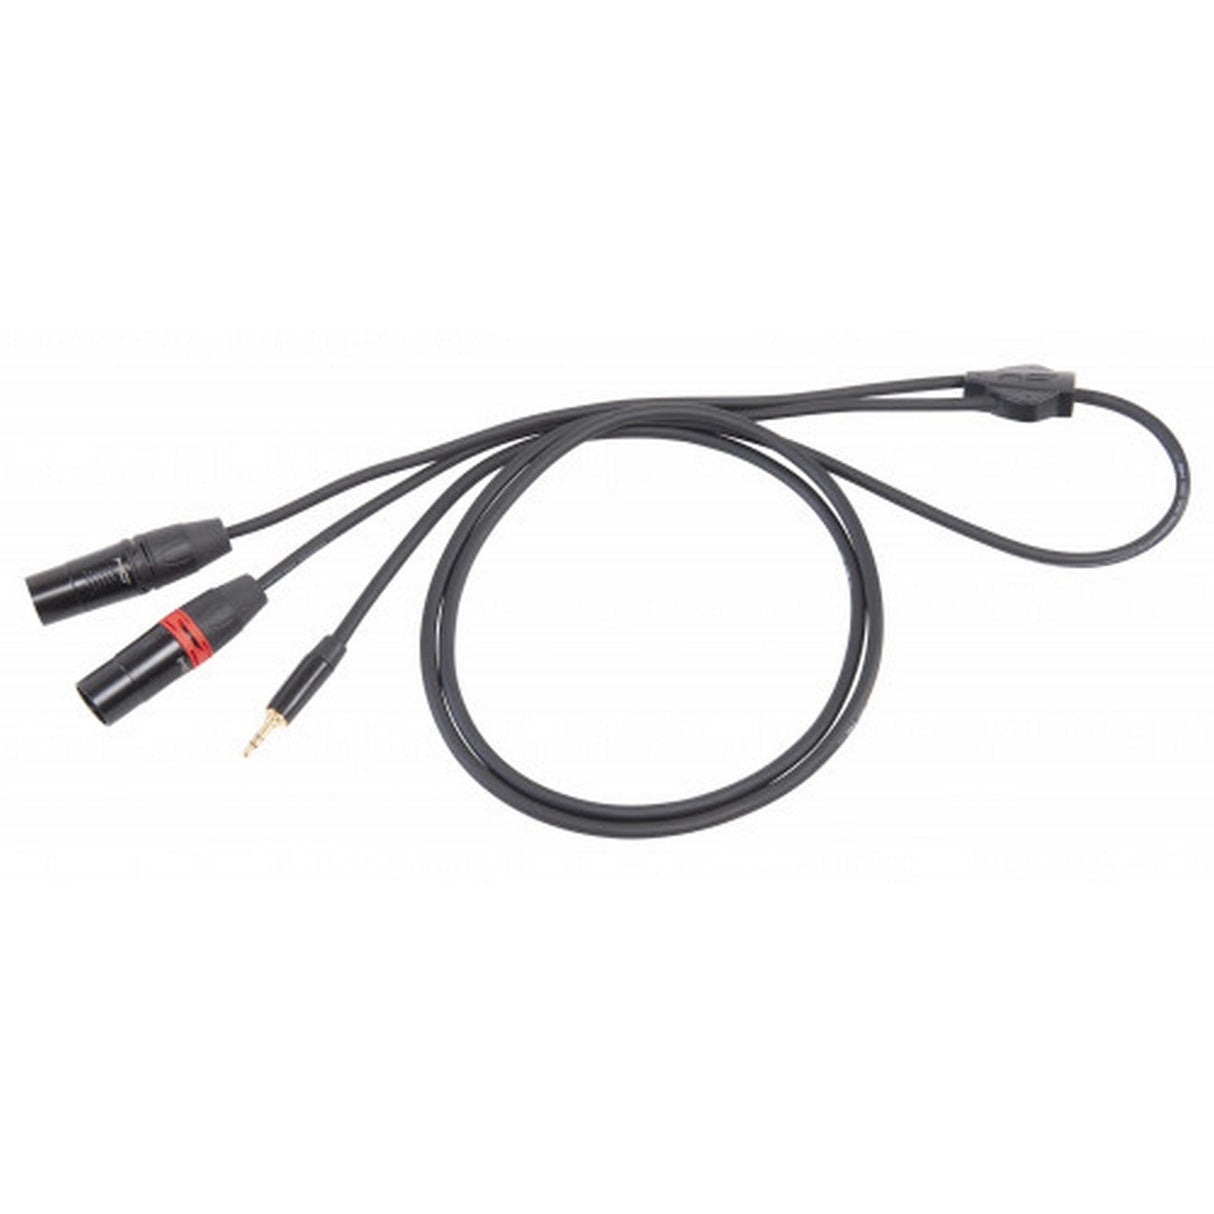 DieHard DHS595LU3 ONEHERO Professional Stereo Cable, 3 m